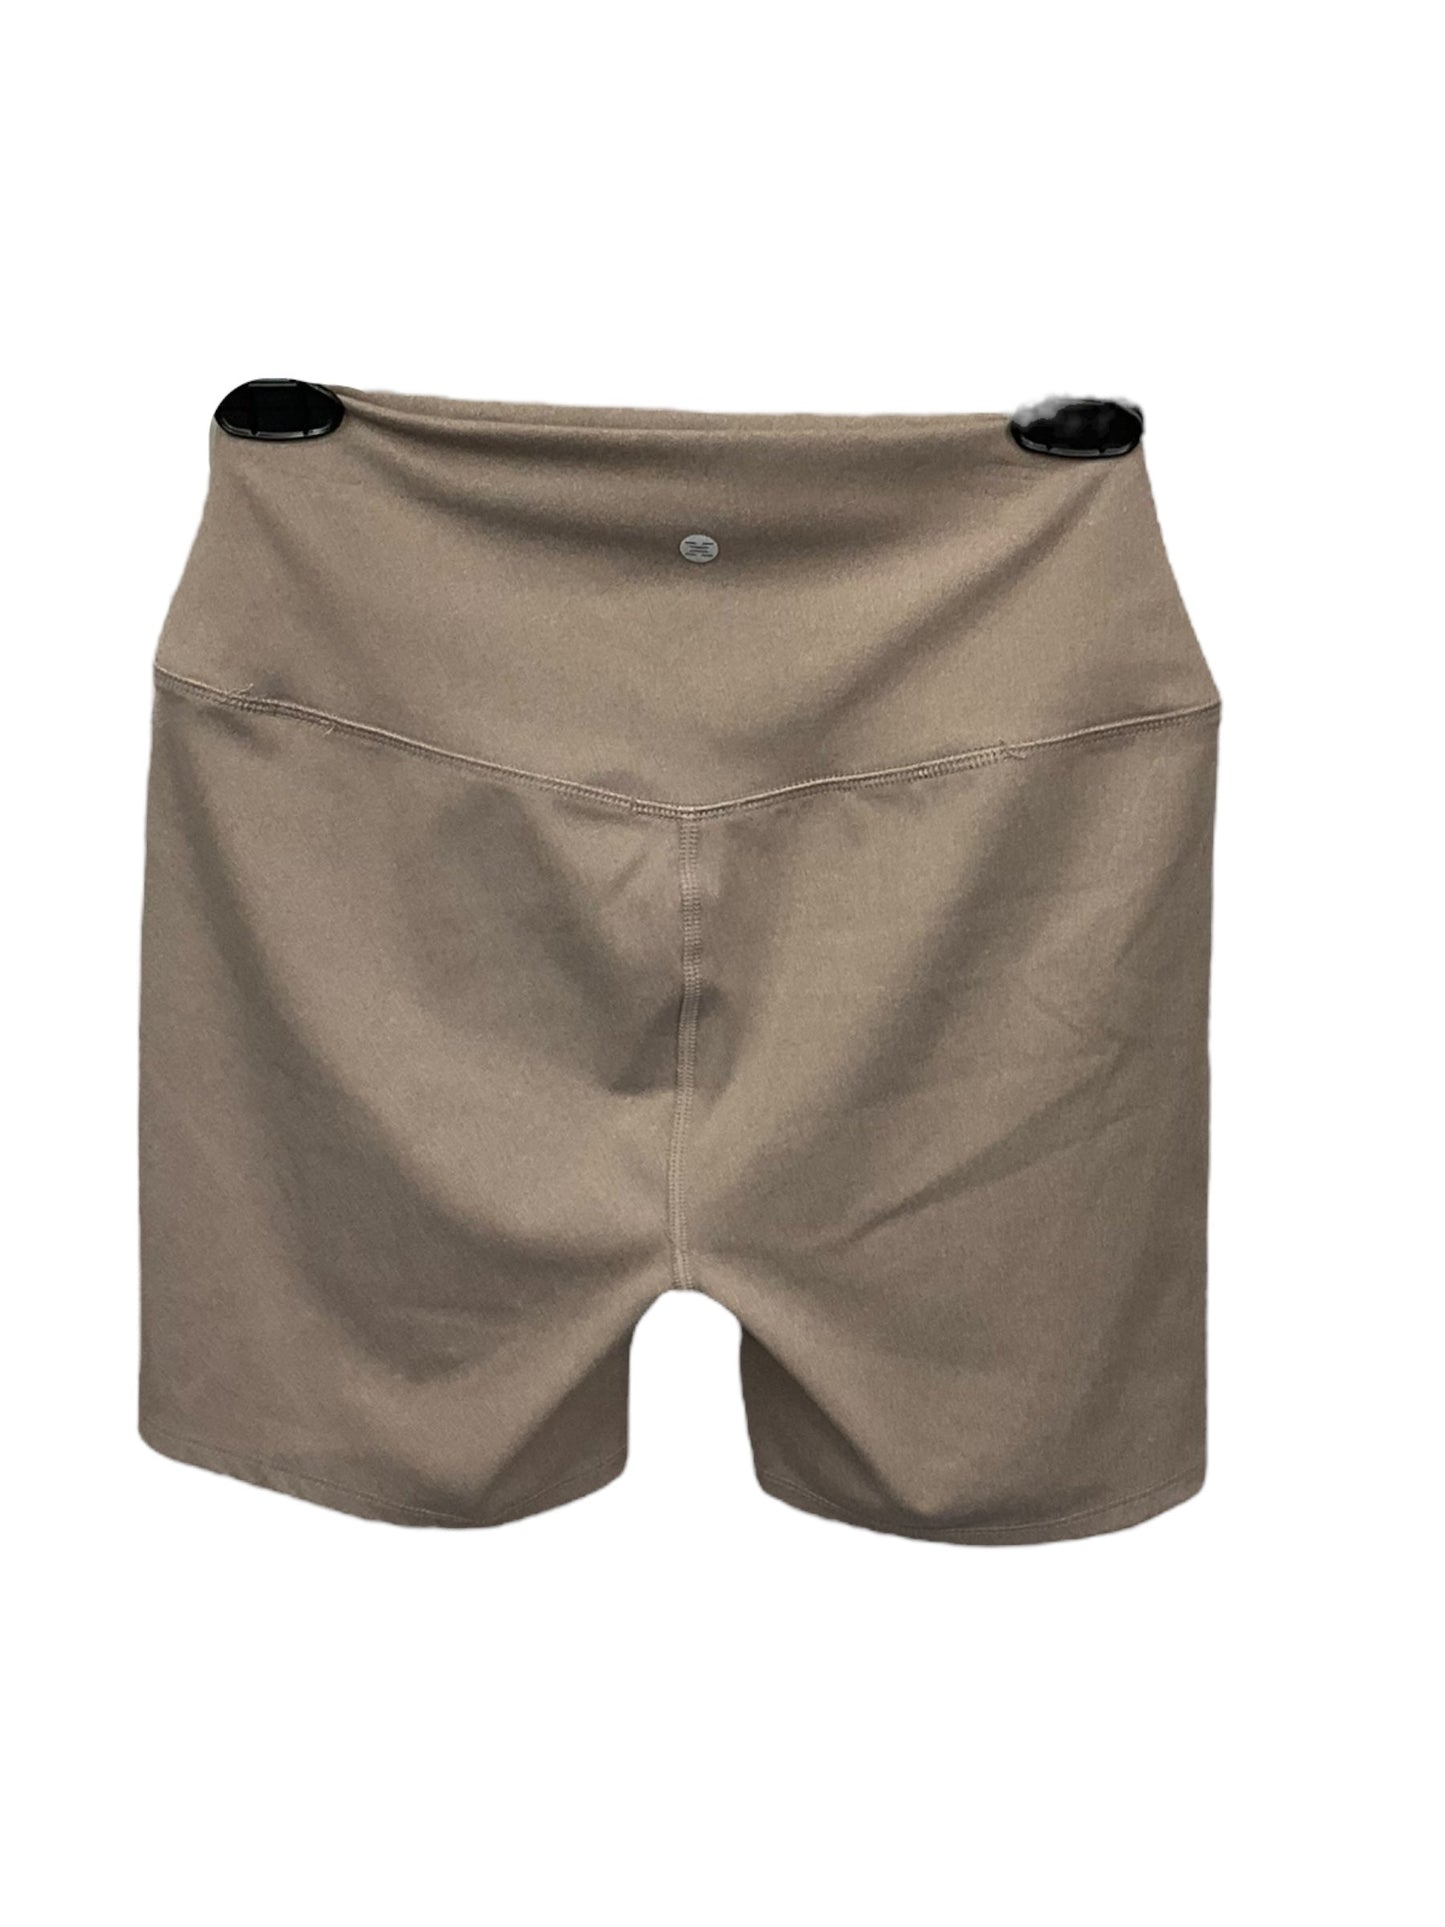 Tan Athletic Shorts Rbx, Size M